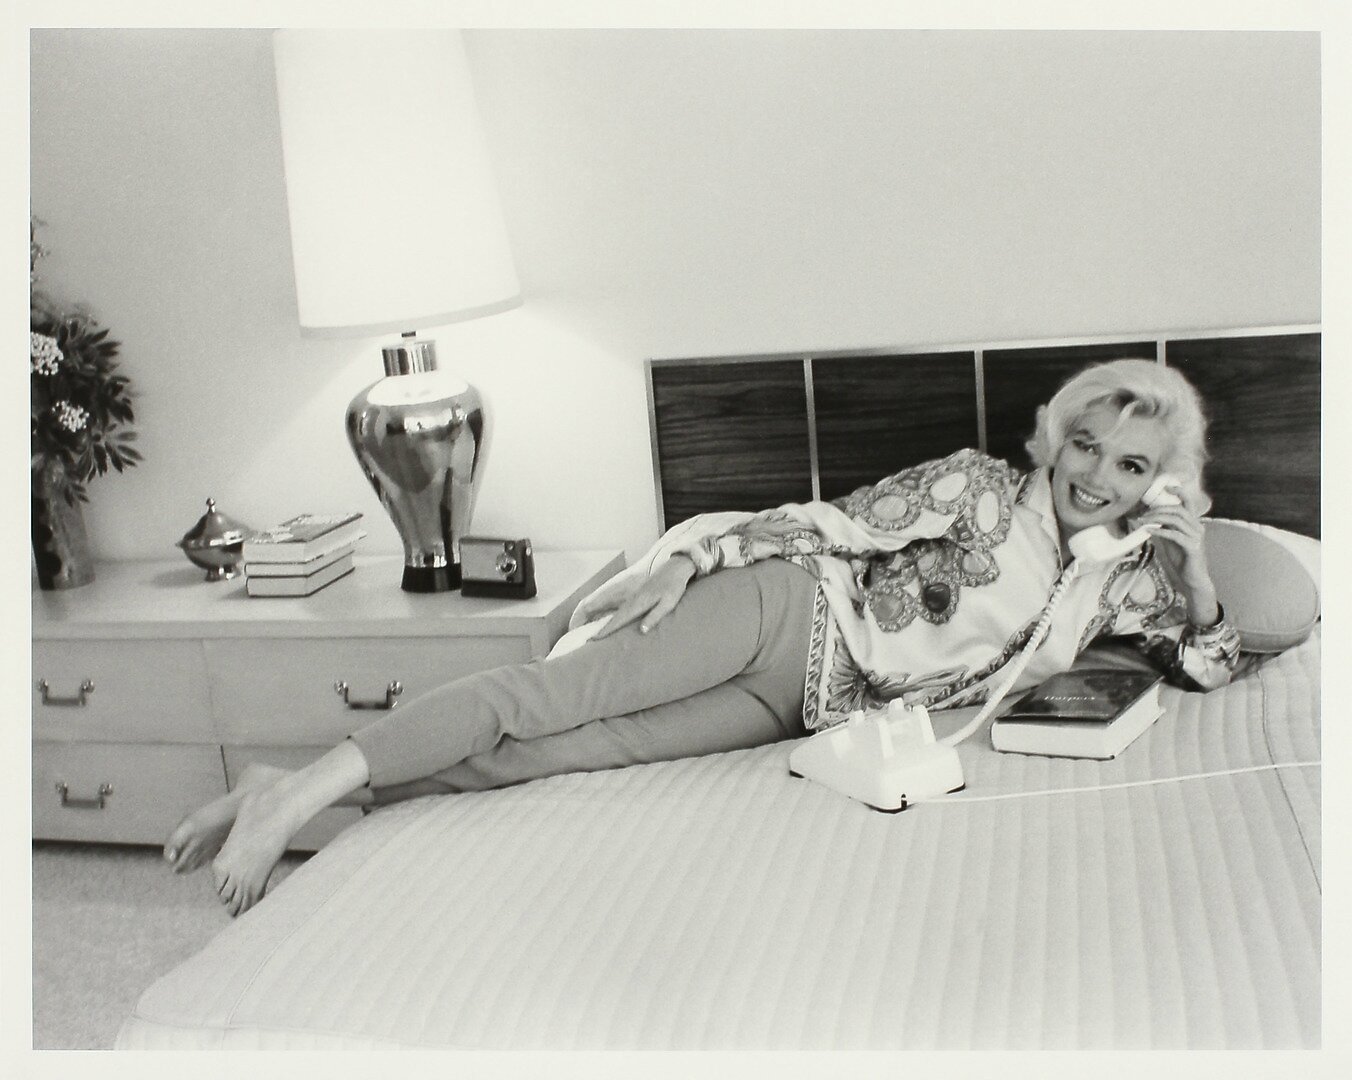 1962-06-tim_leimert_house-pucci_jacket-bedroom-by_barris-031-1